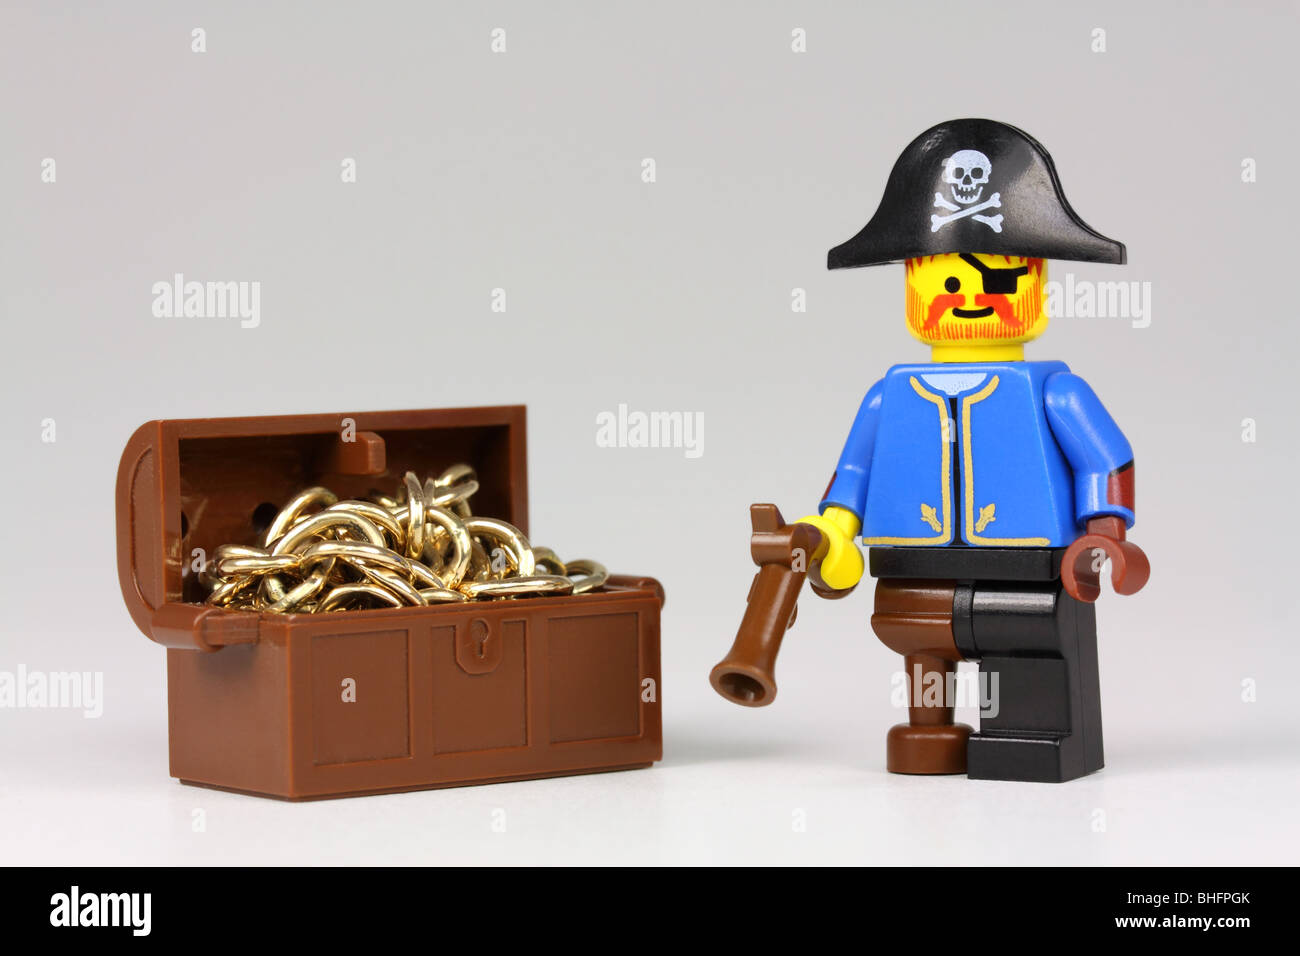 444 Lego Pirates Images, Stock Photos, 3D objects, & Vectors